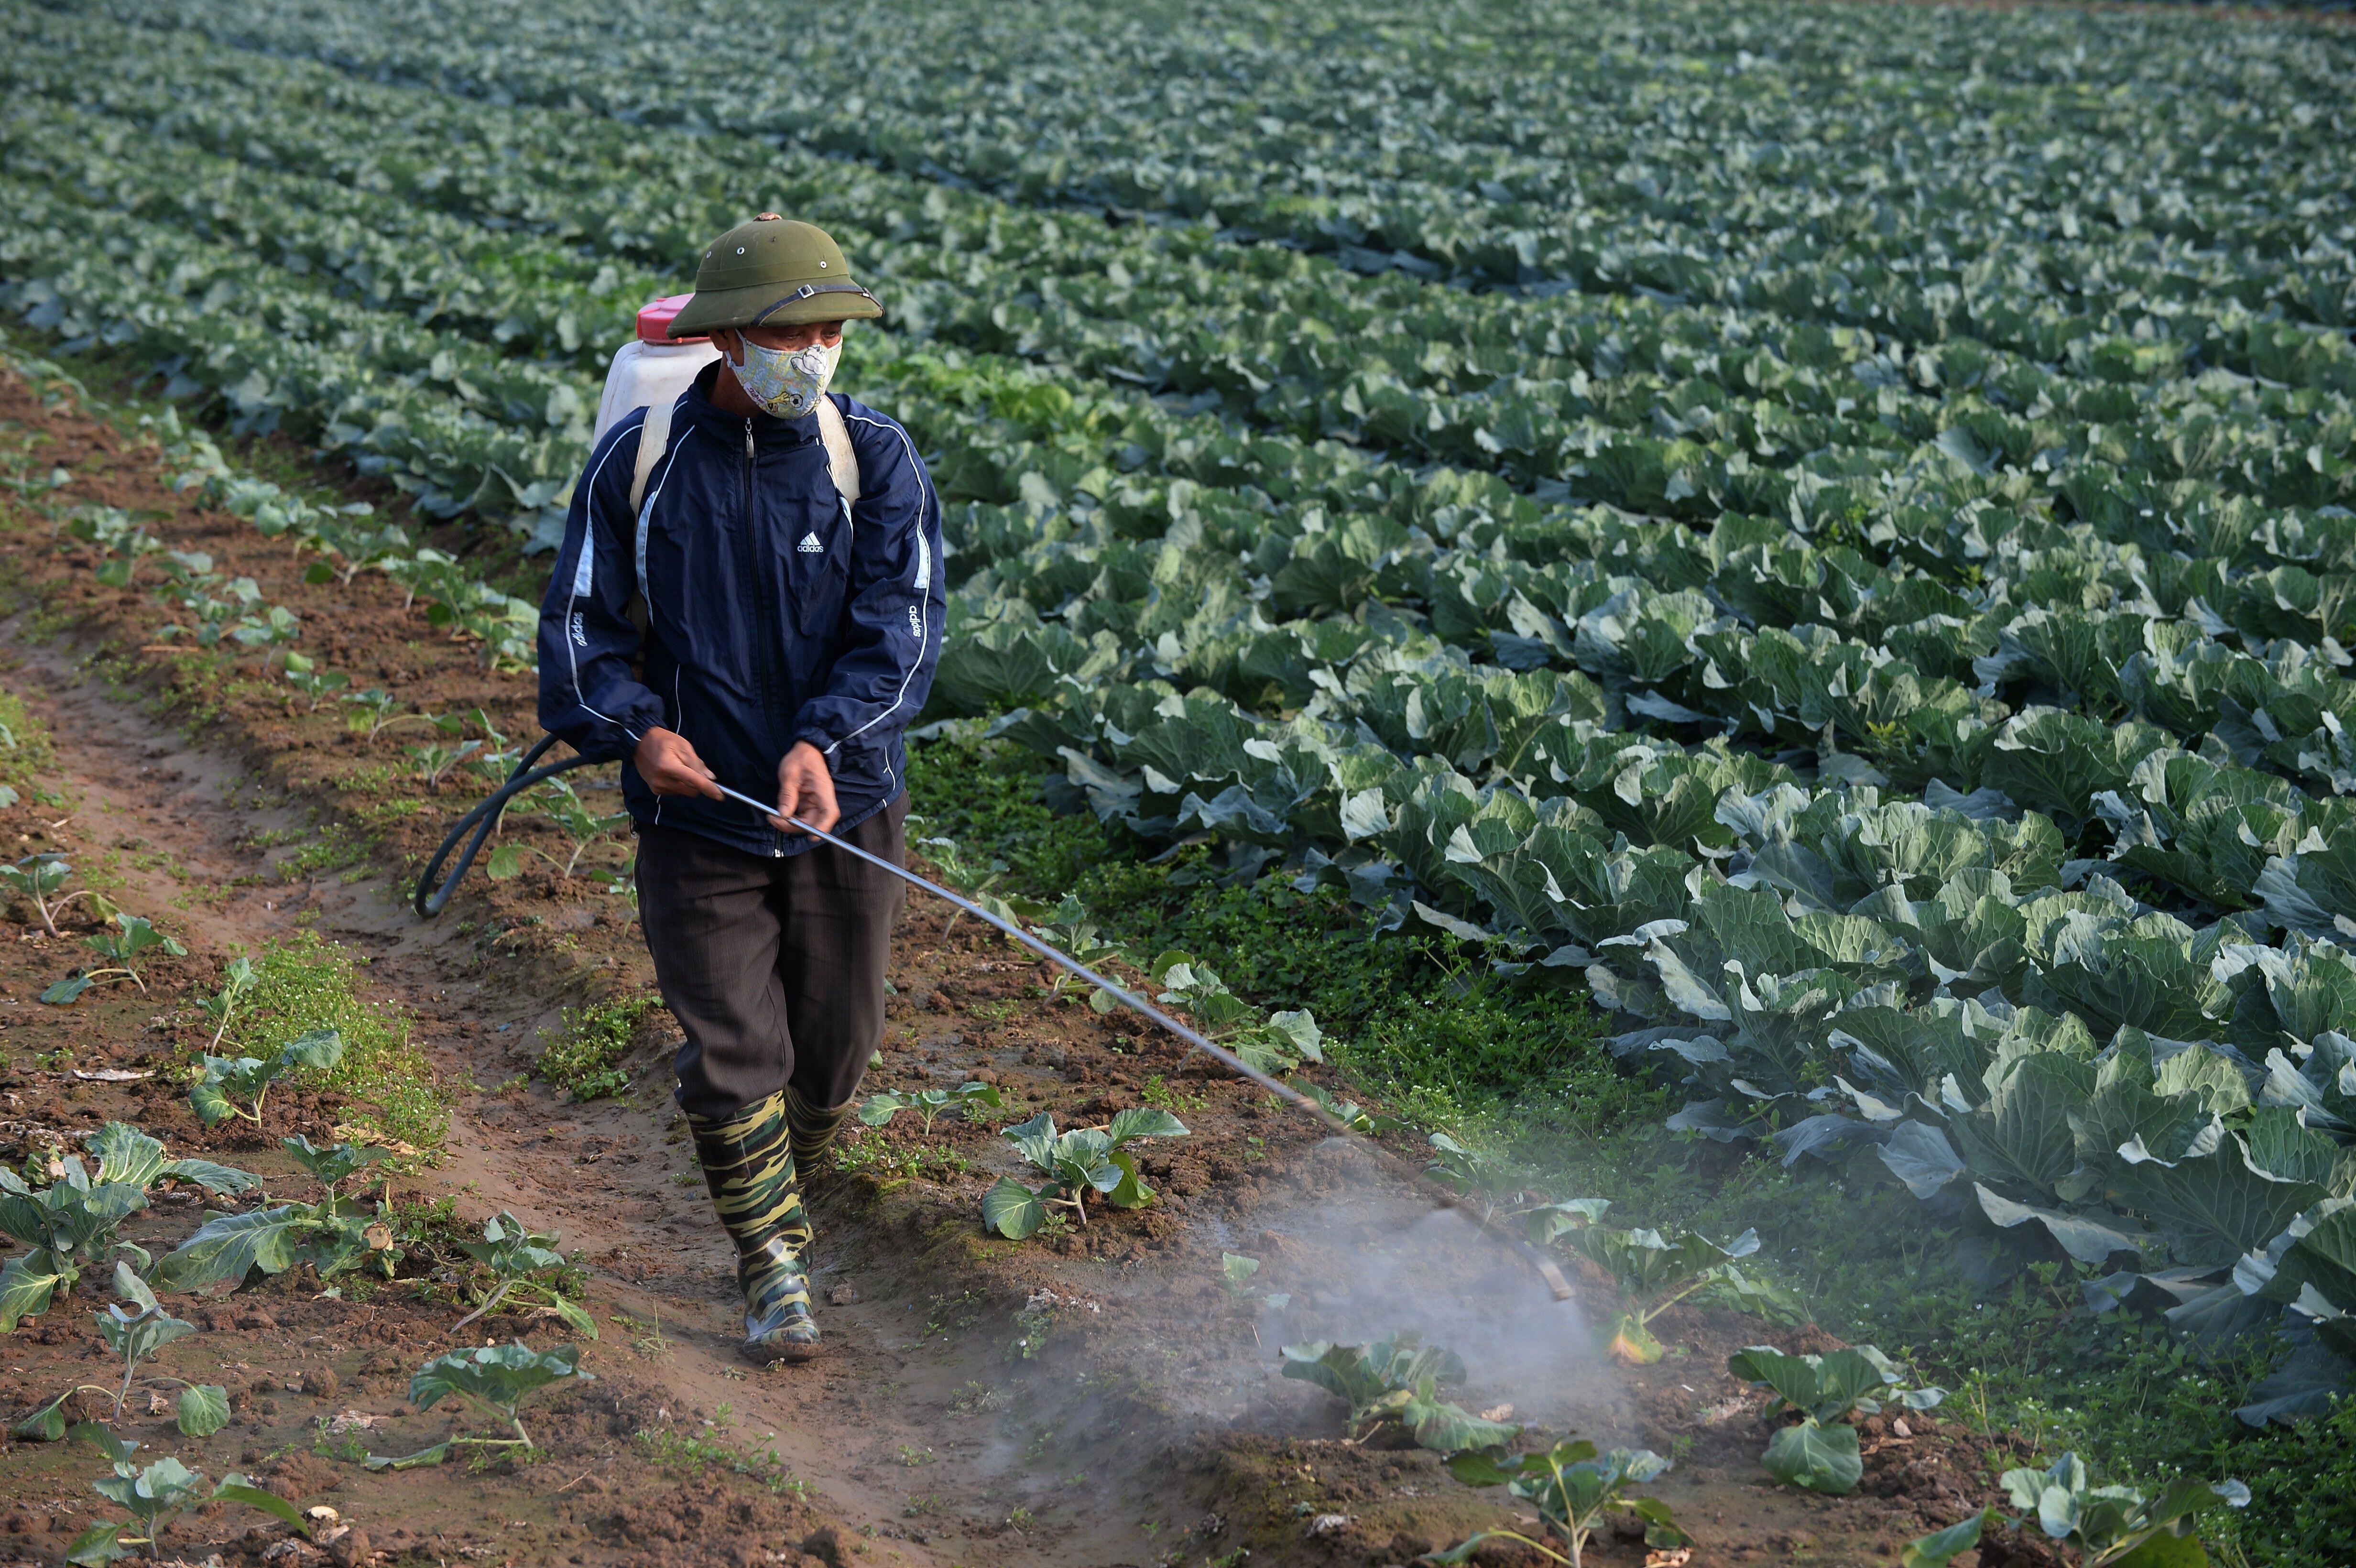 China will reduce the use of pesticides in fruits and vegetables by 10% by 2025